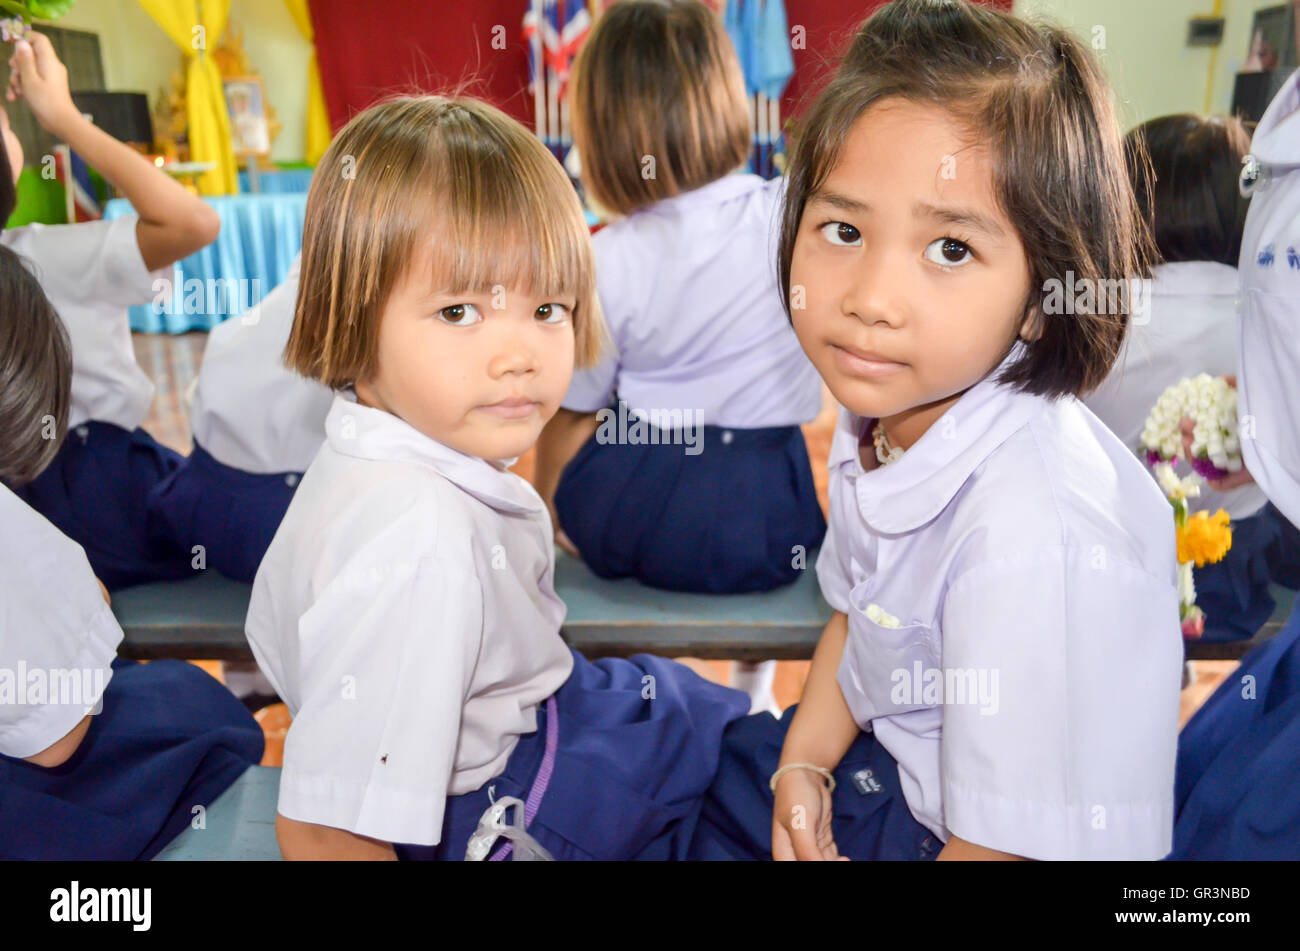 Thai student in Chumchon wat bandong school on August 12, 2016 in Phitsanulok, Thailand. Stock Photo